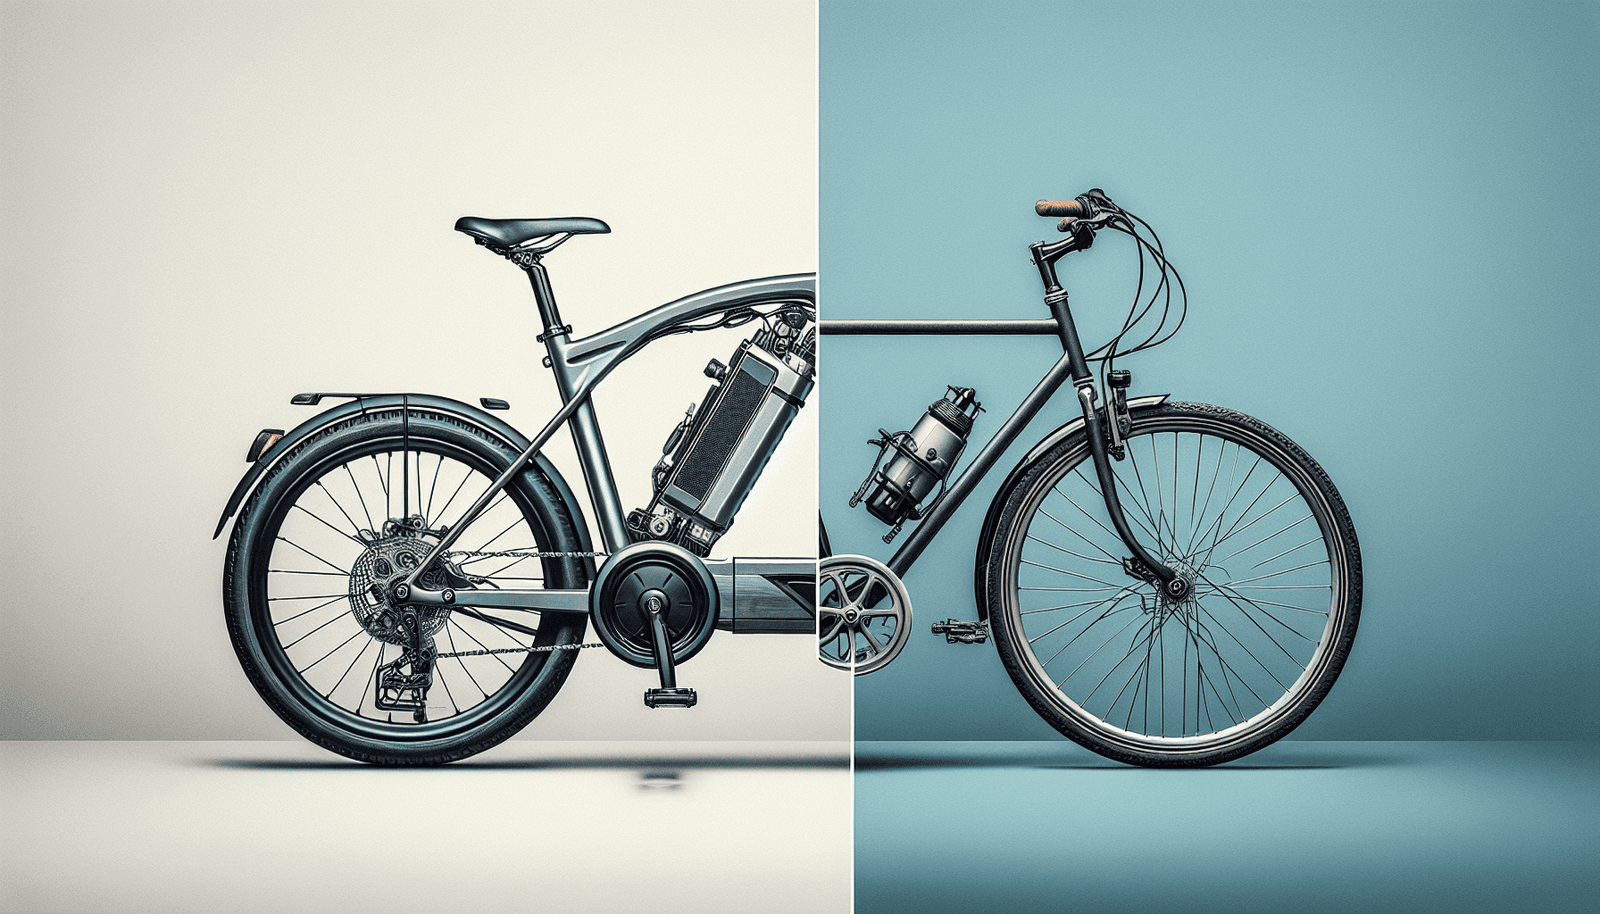 How Does The Maintenance Cost Of An Electric Bike Compare To A Traditional Bike?